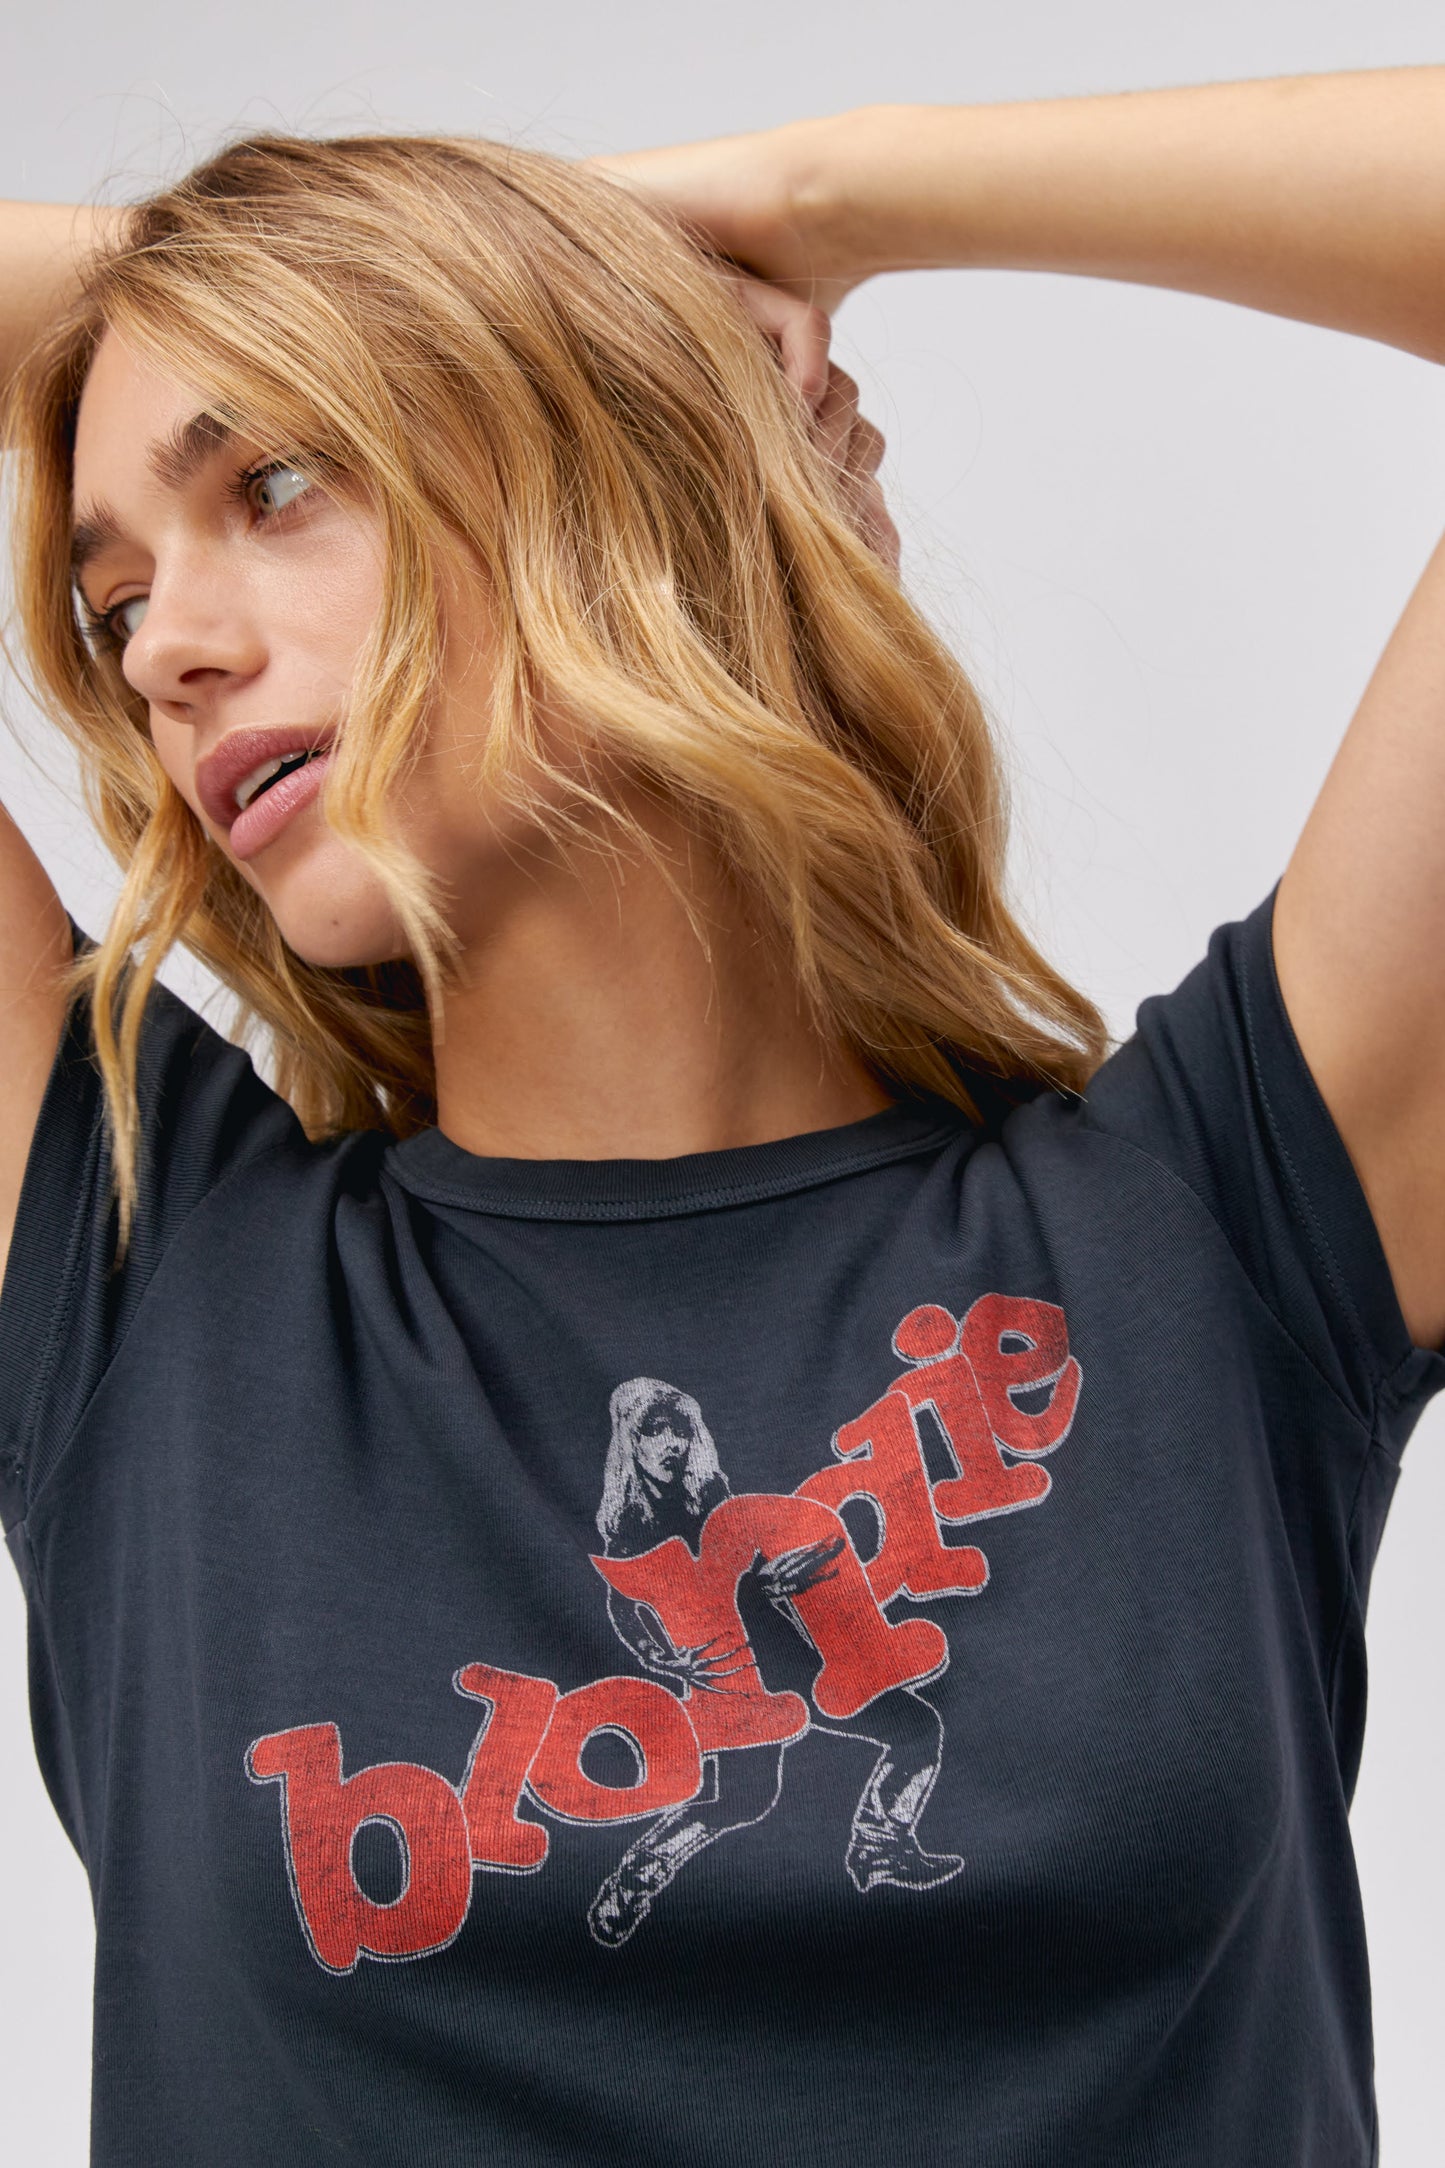 A blonde-haired model featuring a black tee stamped with 'blondie' in red, scattered letters.